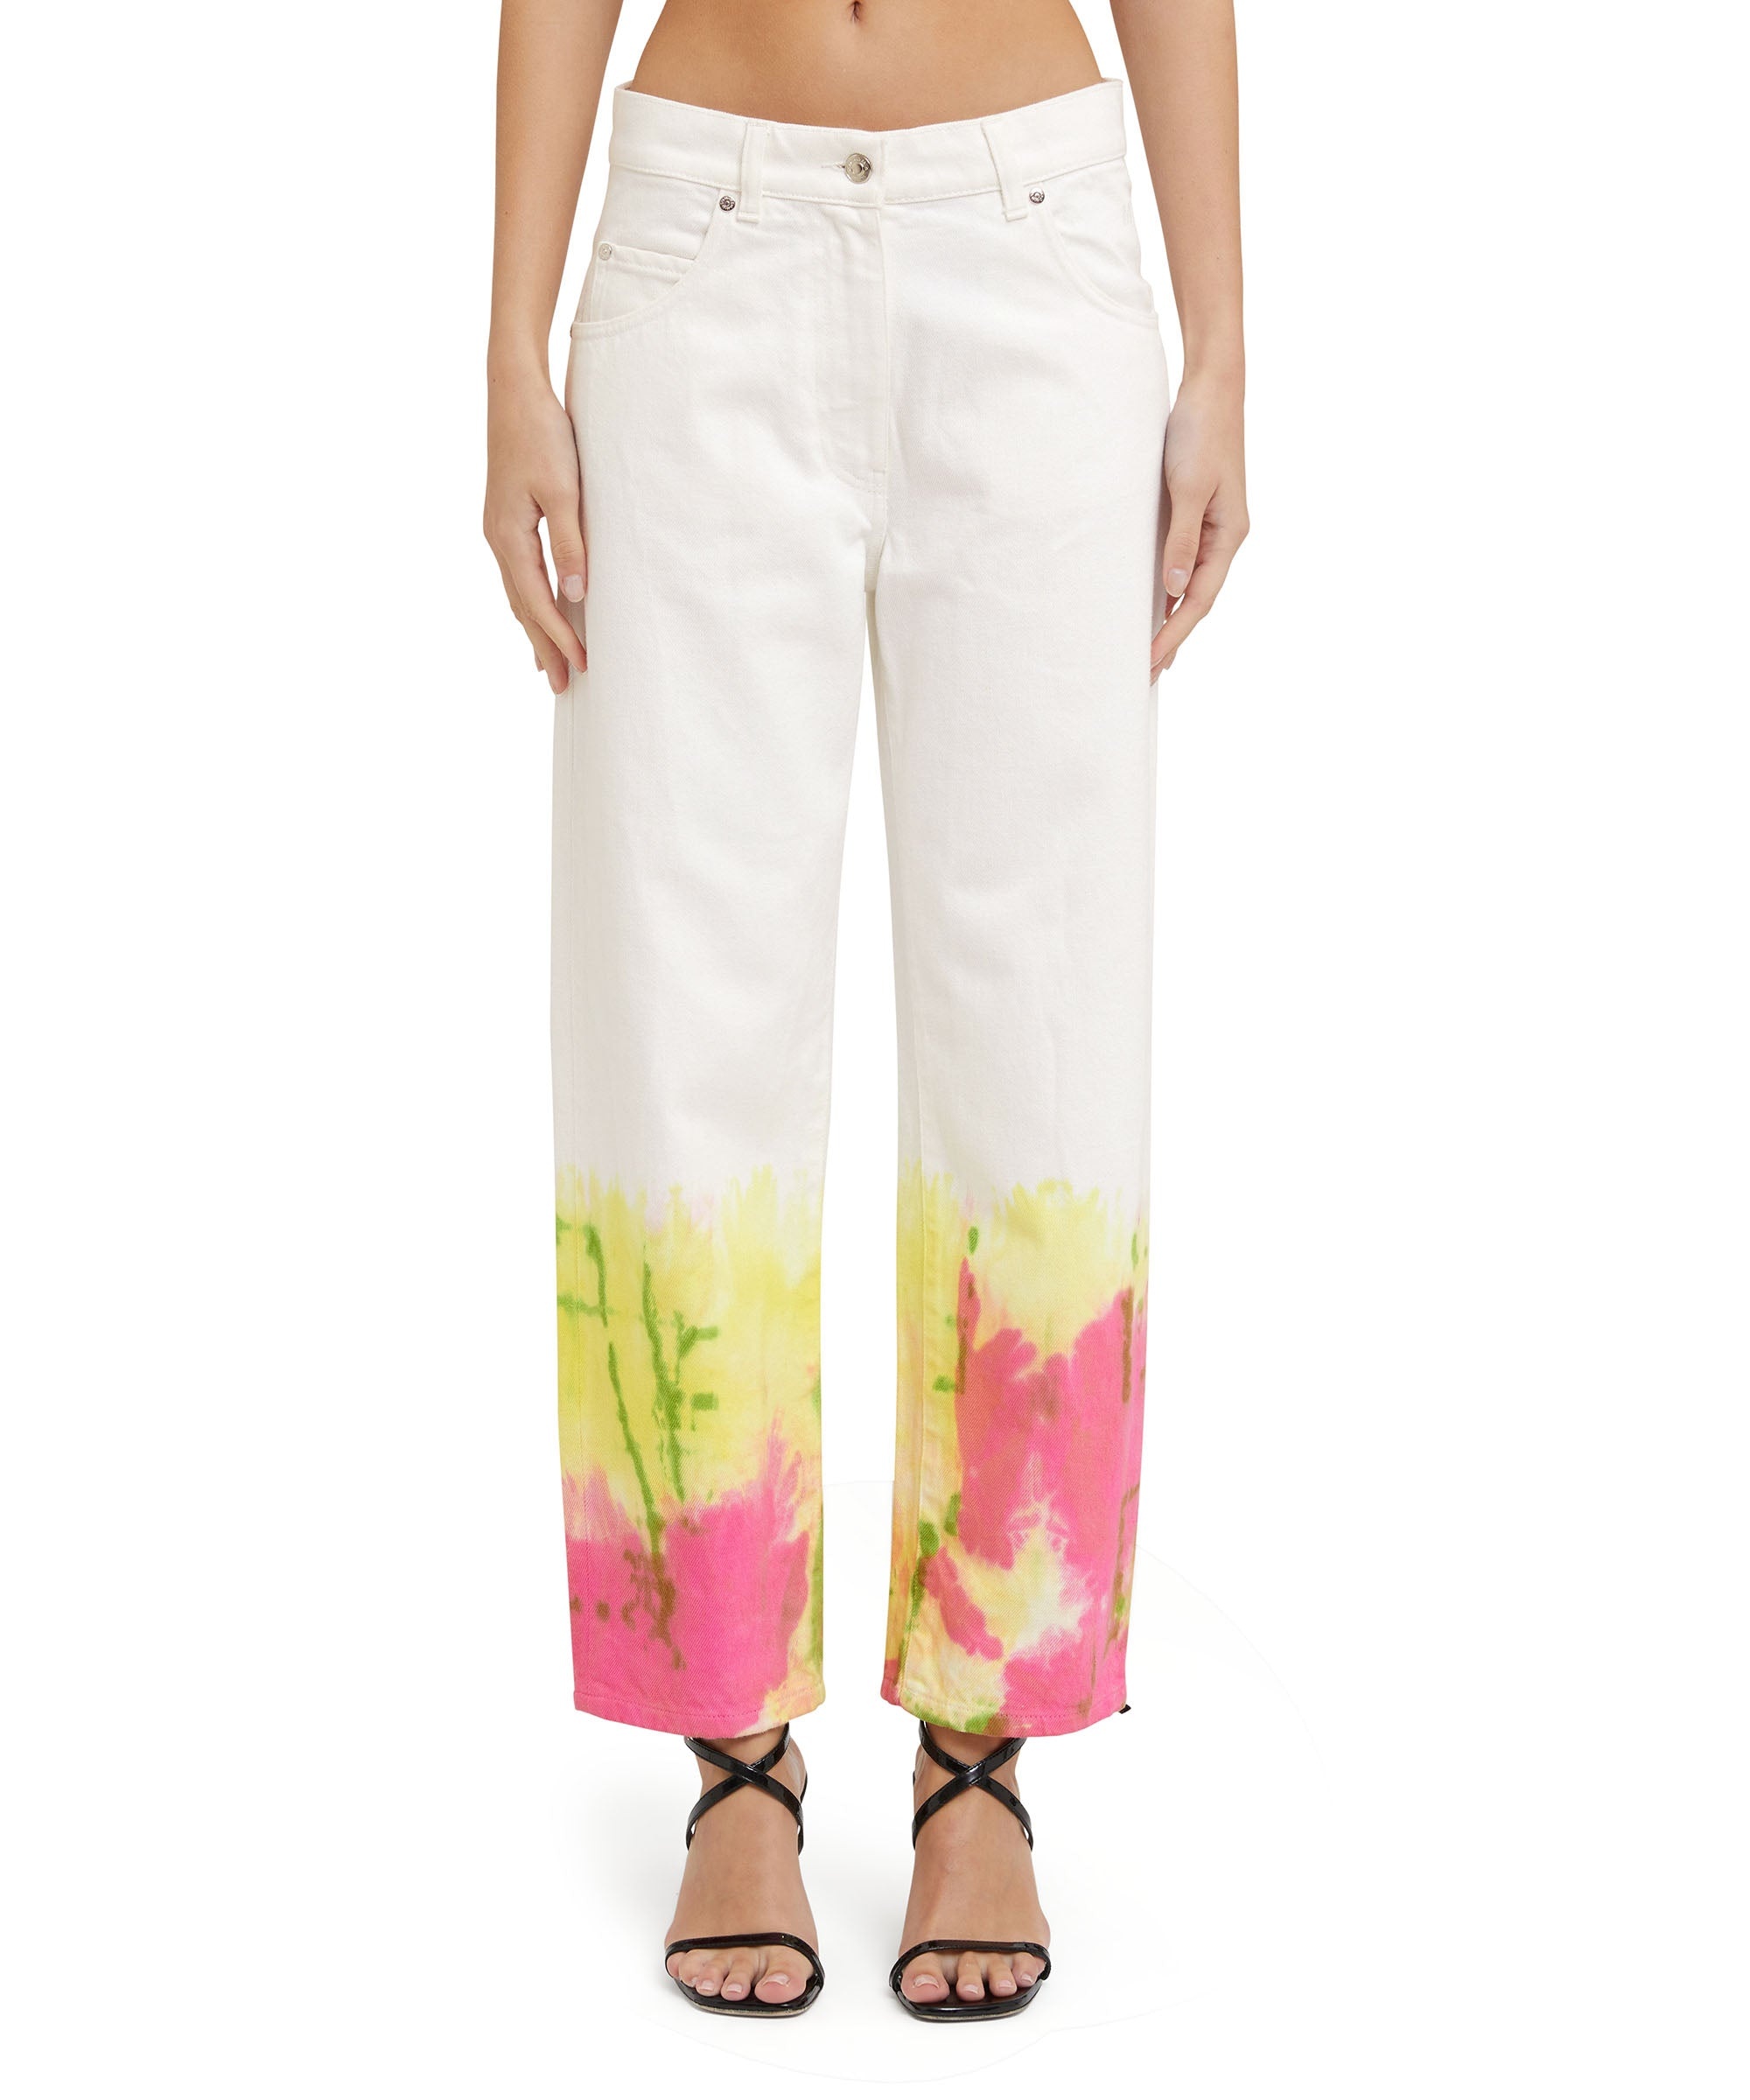 Bull cotton pants with tie-dye treatment - 2